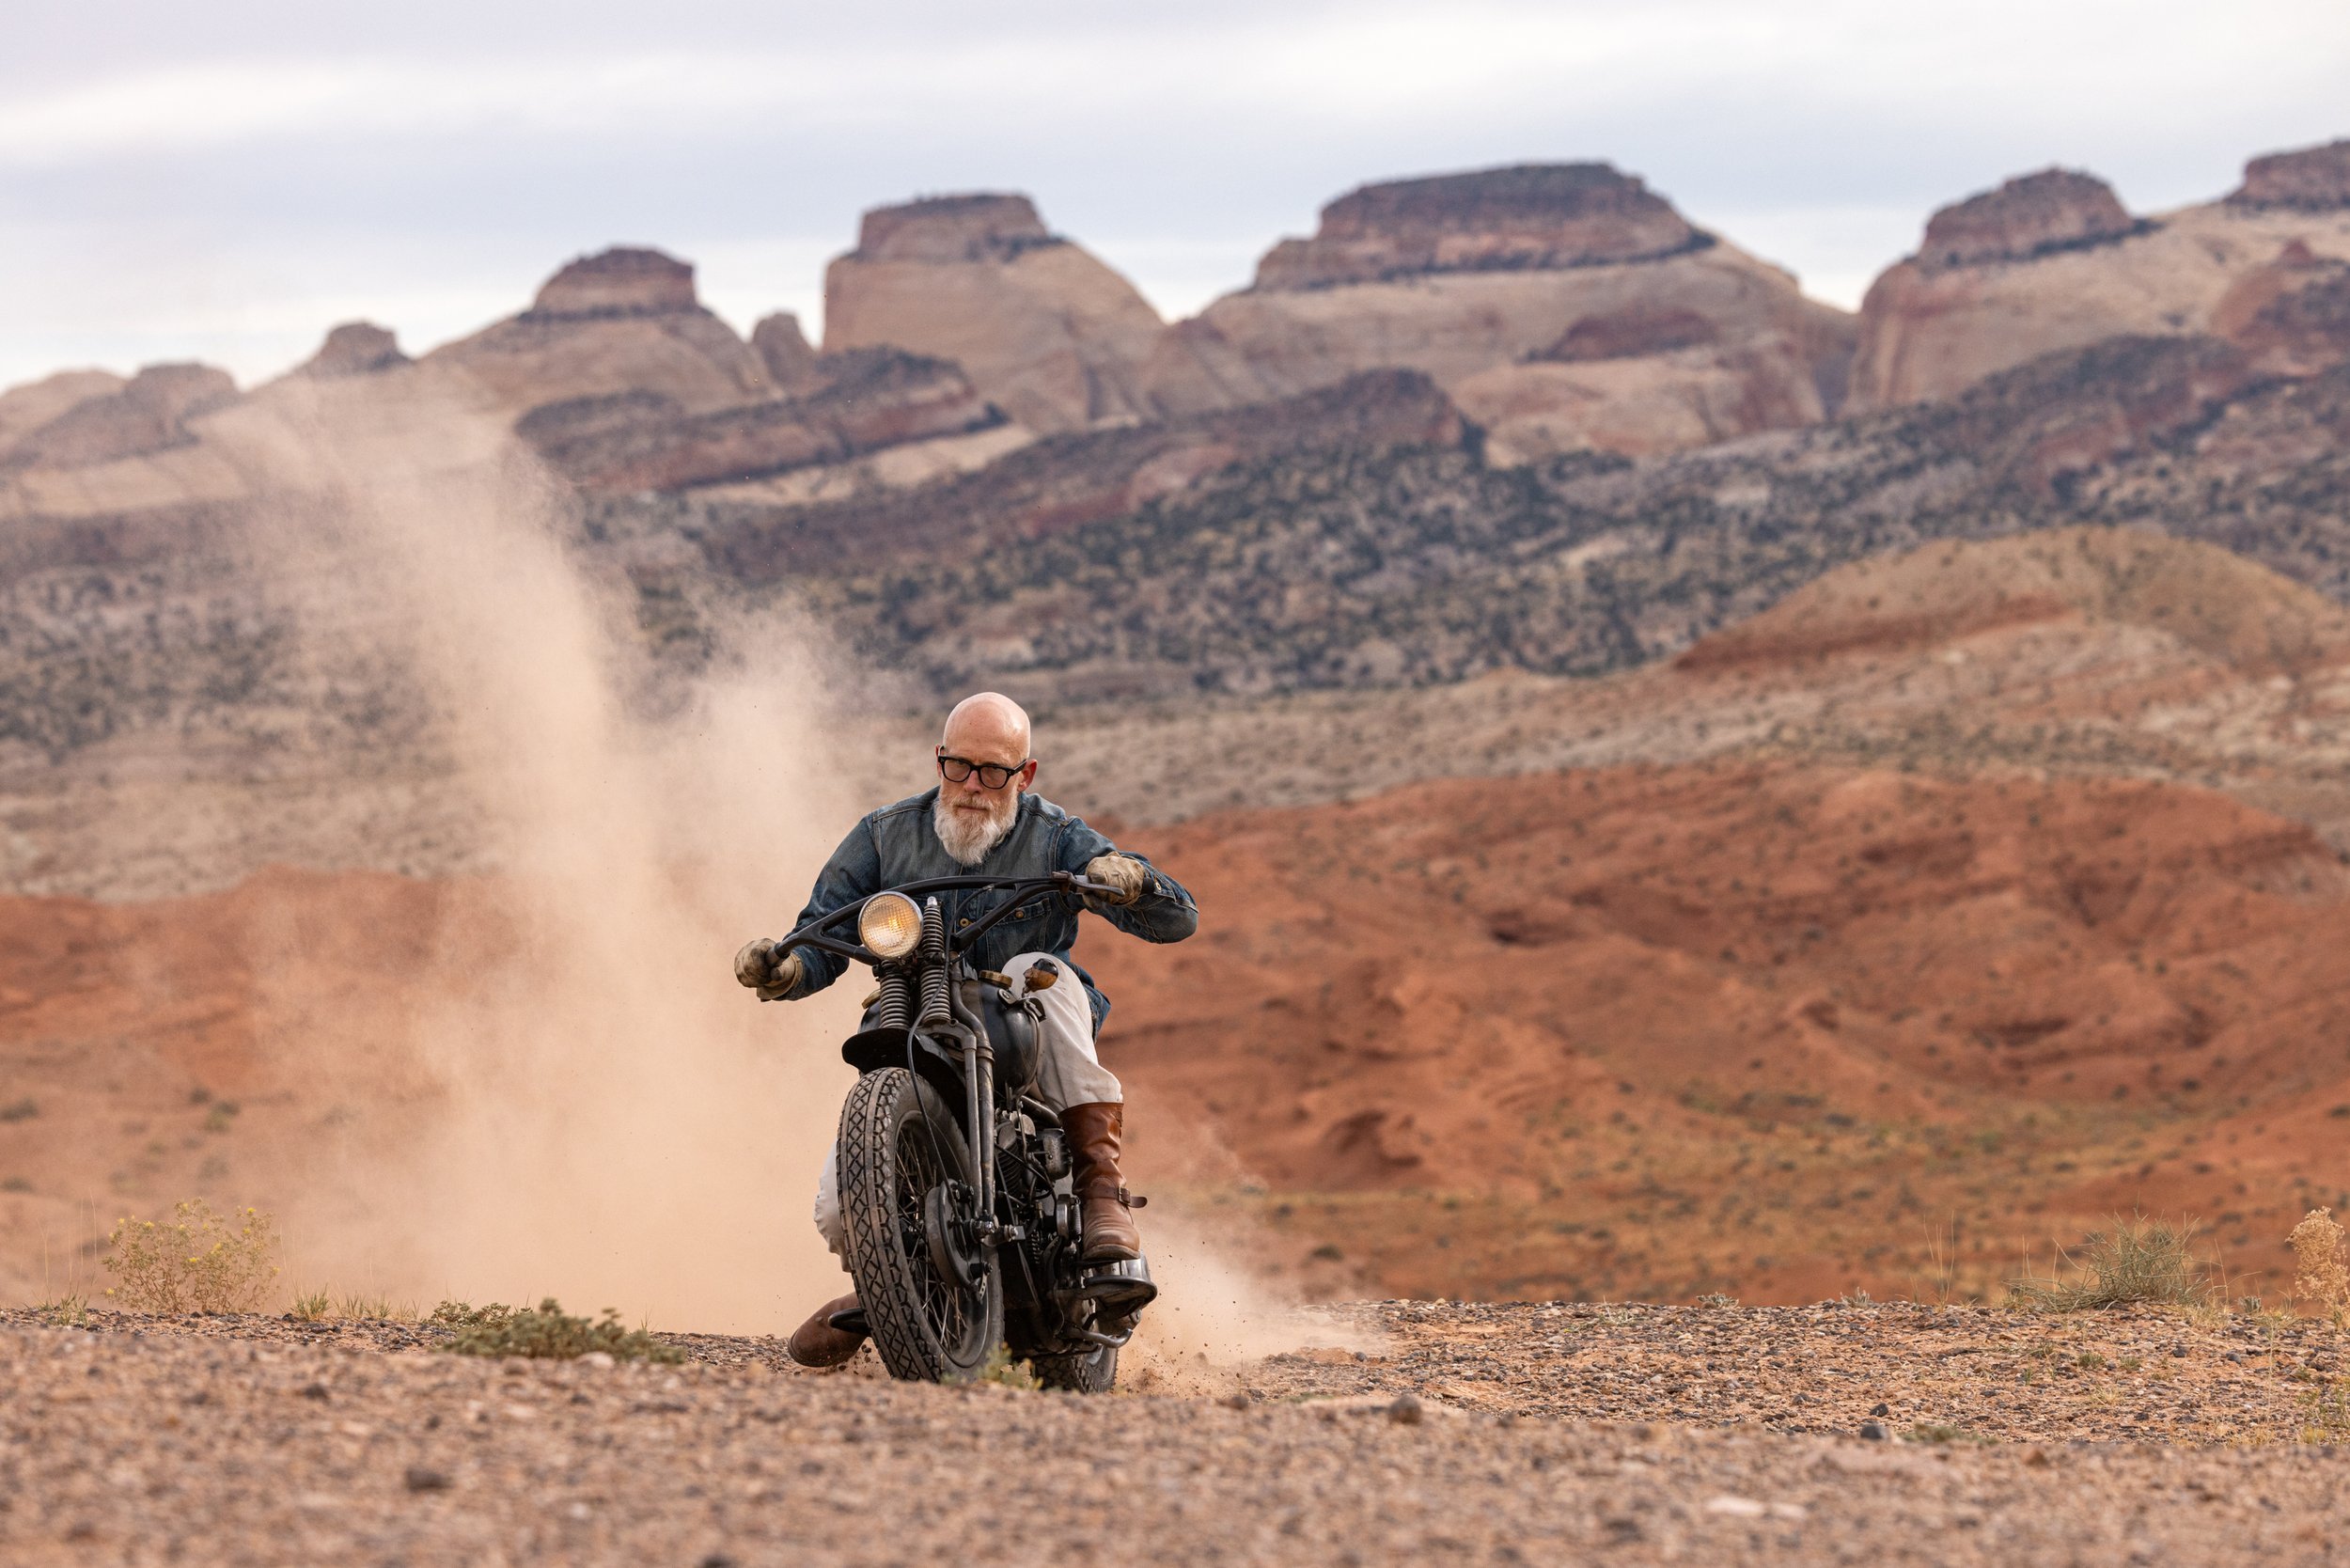 Embrace the Adventure: Unleash Your Style with Black Bear Brand Denim. 🏍️🏔️ #MensFashionMastery